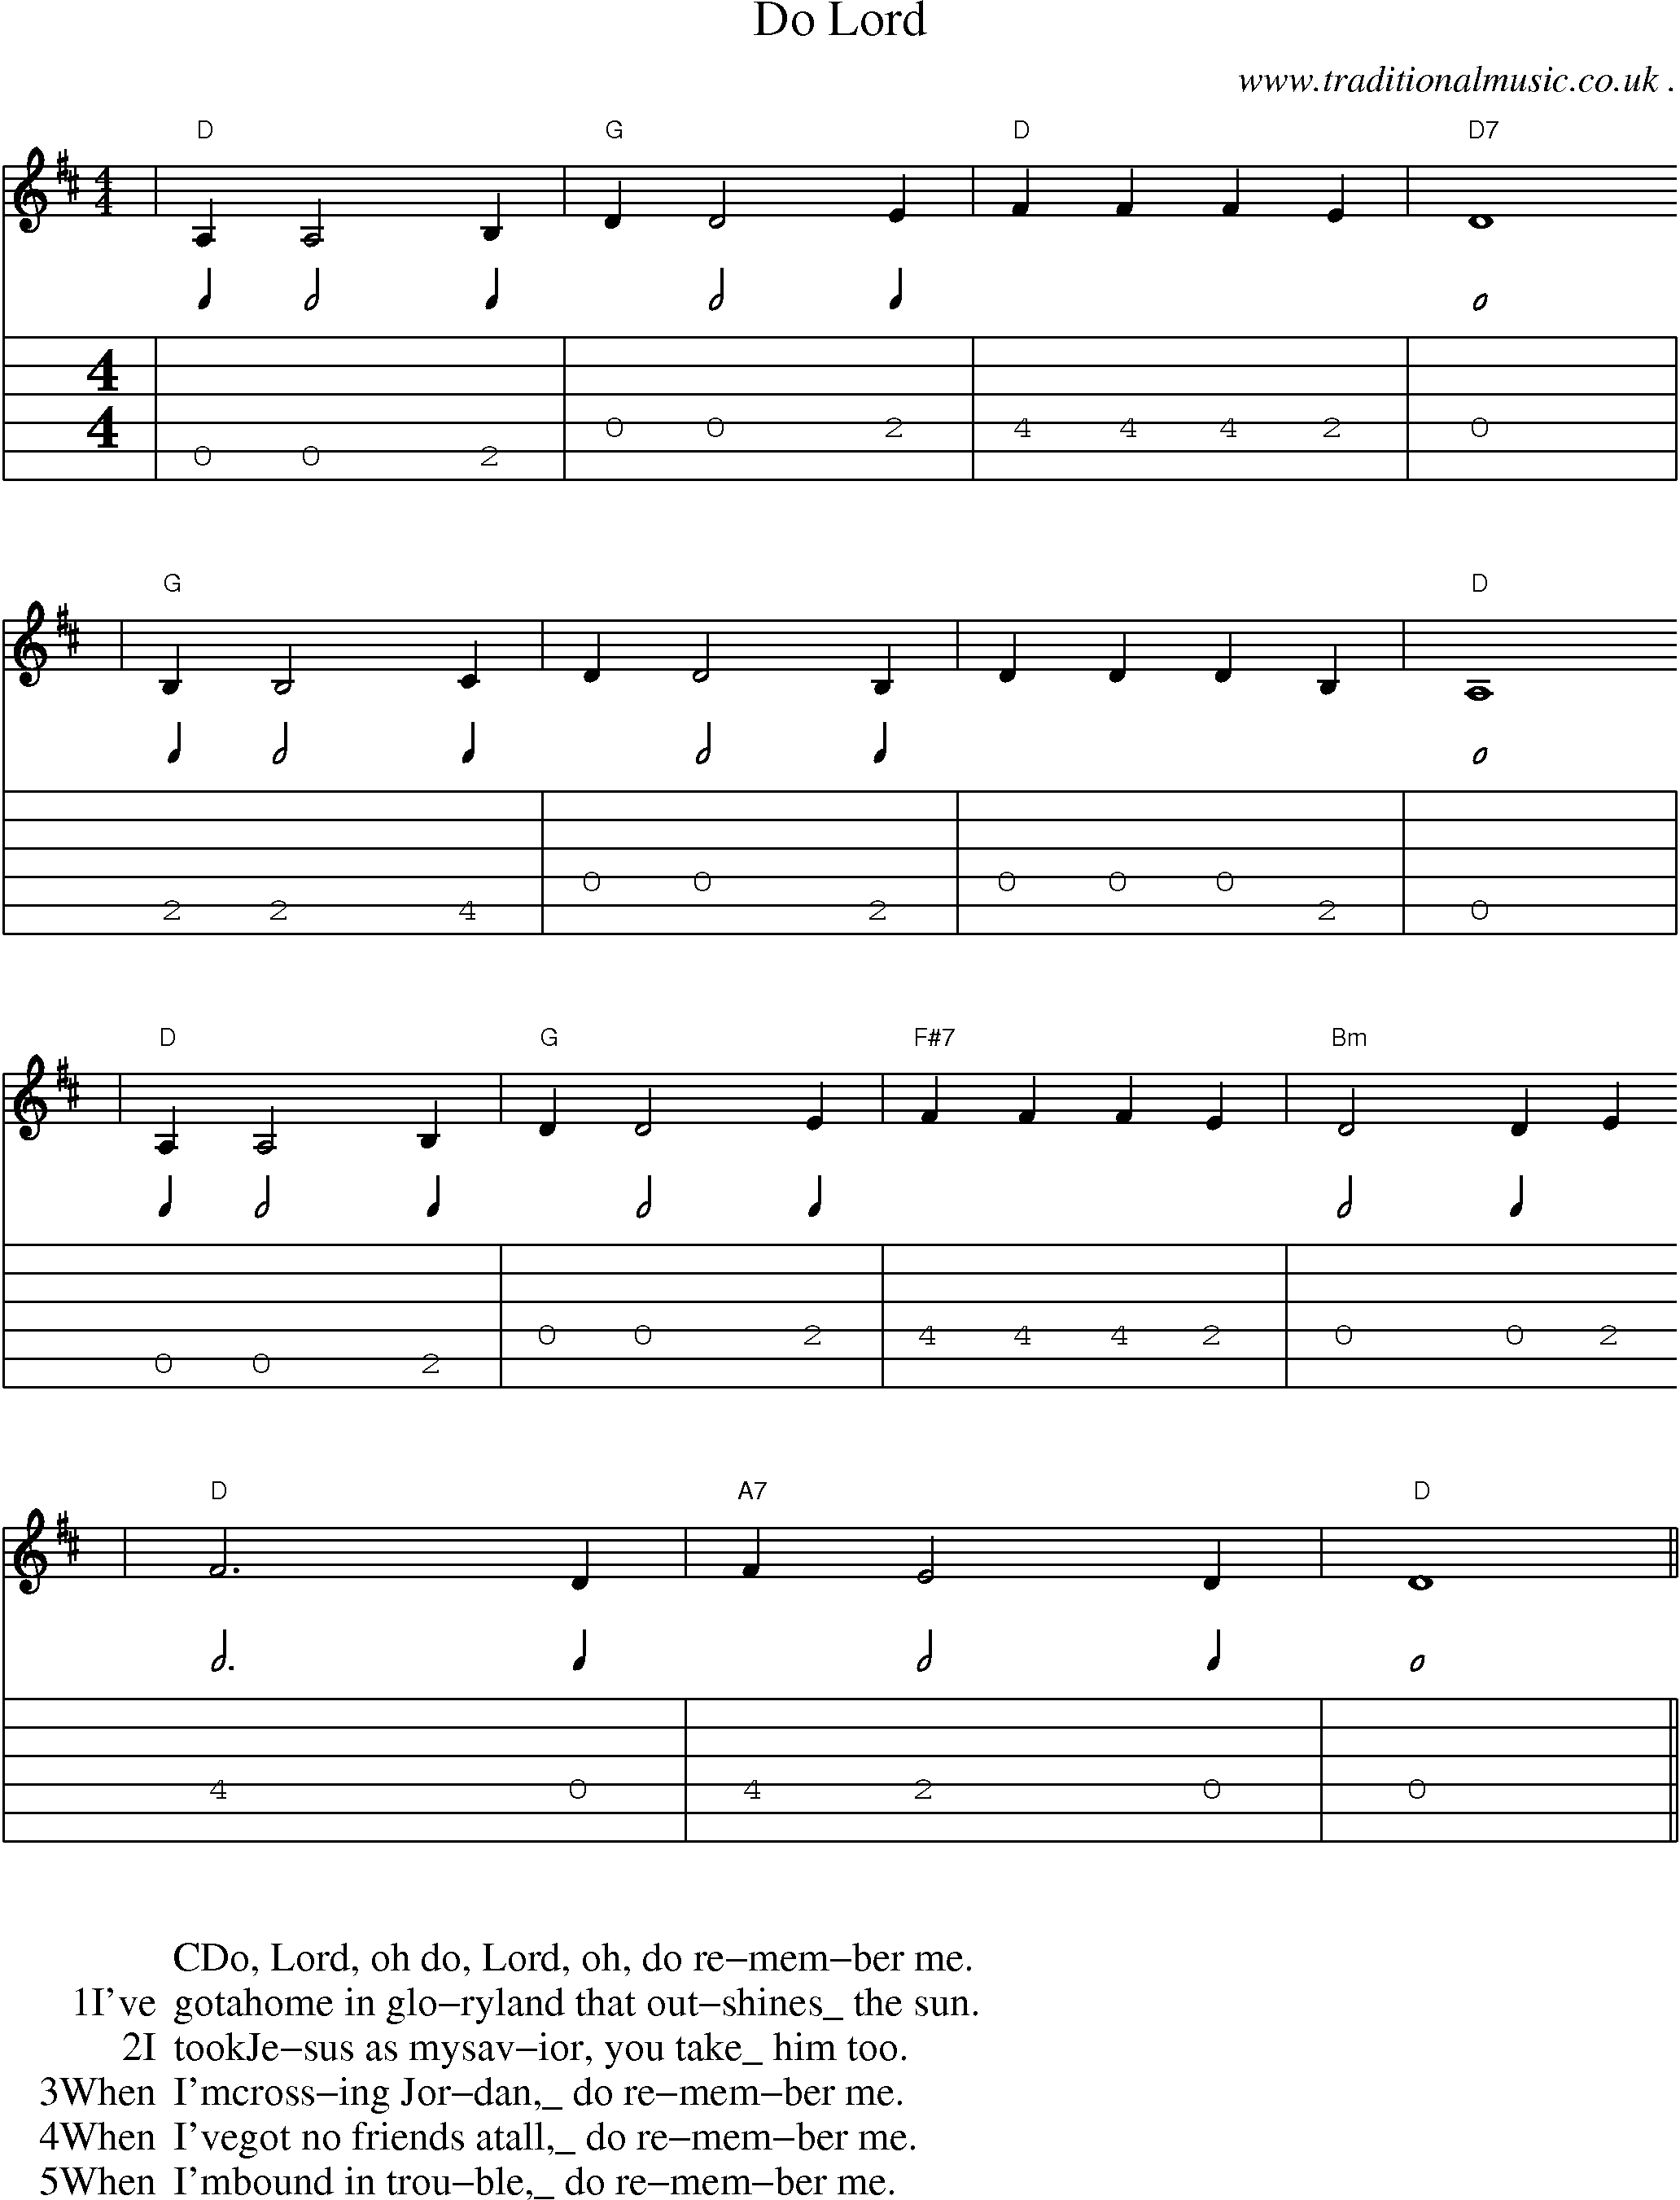 Music Score and Guitar Tabs for Do Lord